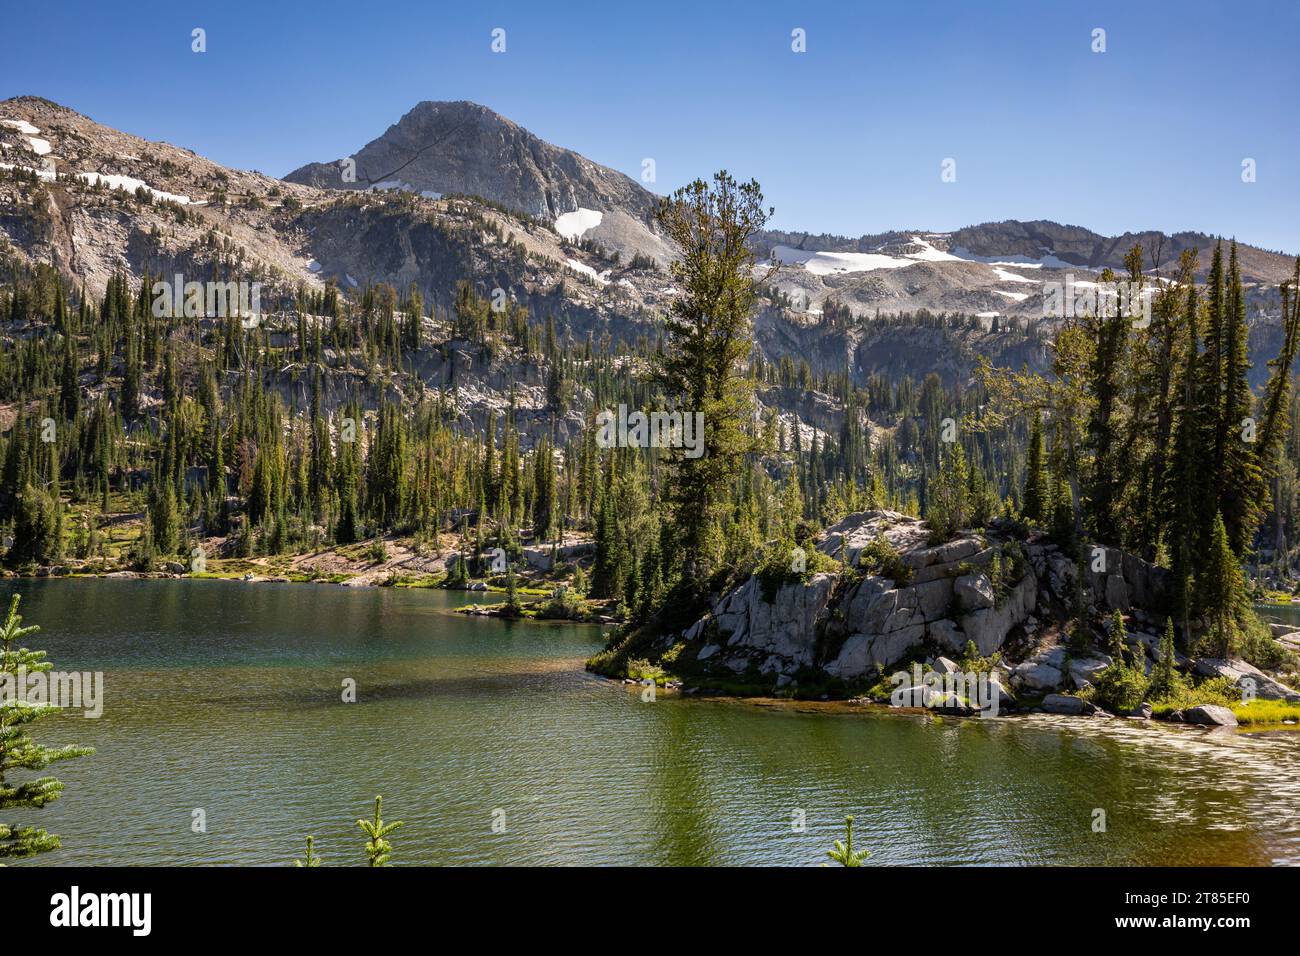 OR02790-00...OREGON - Granite outcrop with trees in Moccasin Lake and Eagle Cap beyond; Eagle Cap Wilderness. Stock Photo